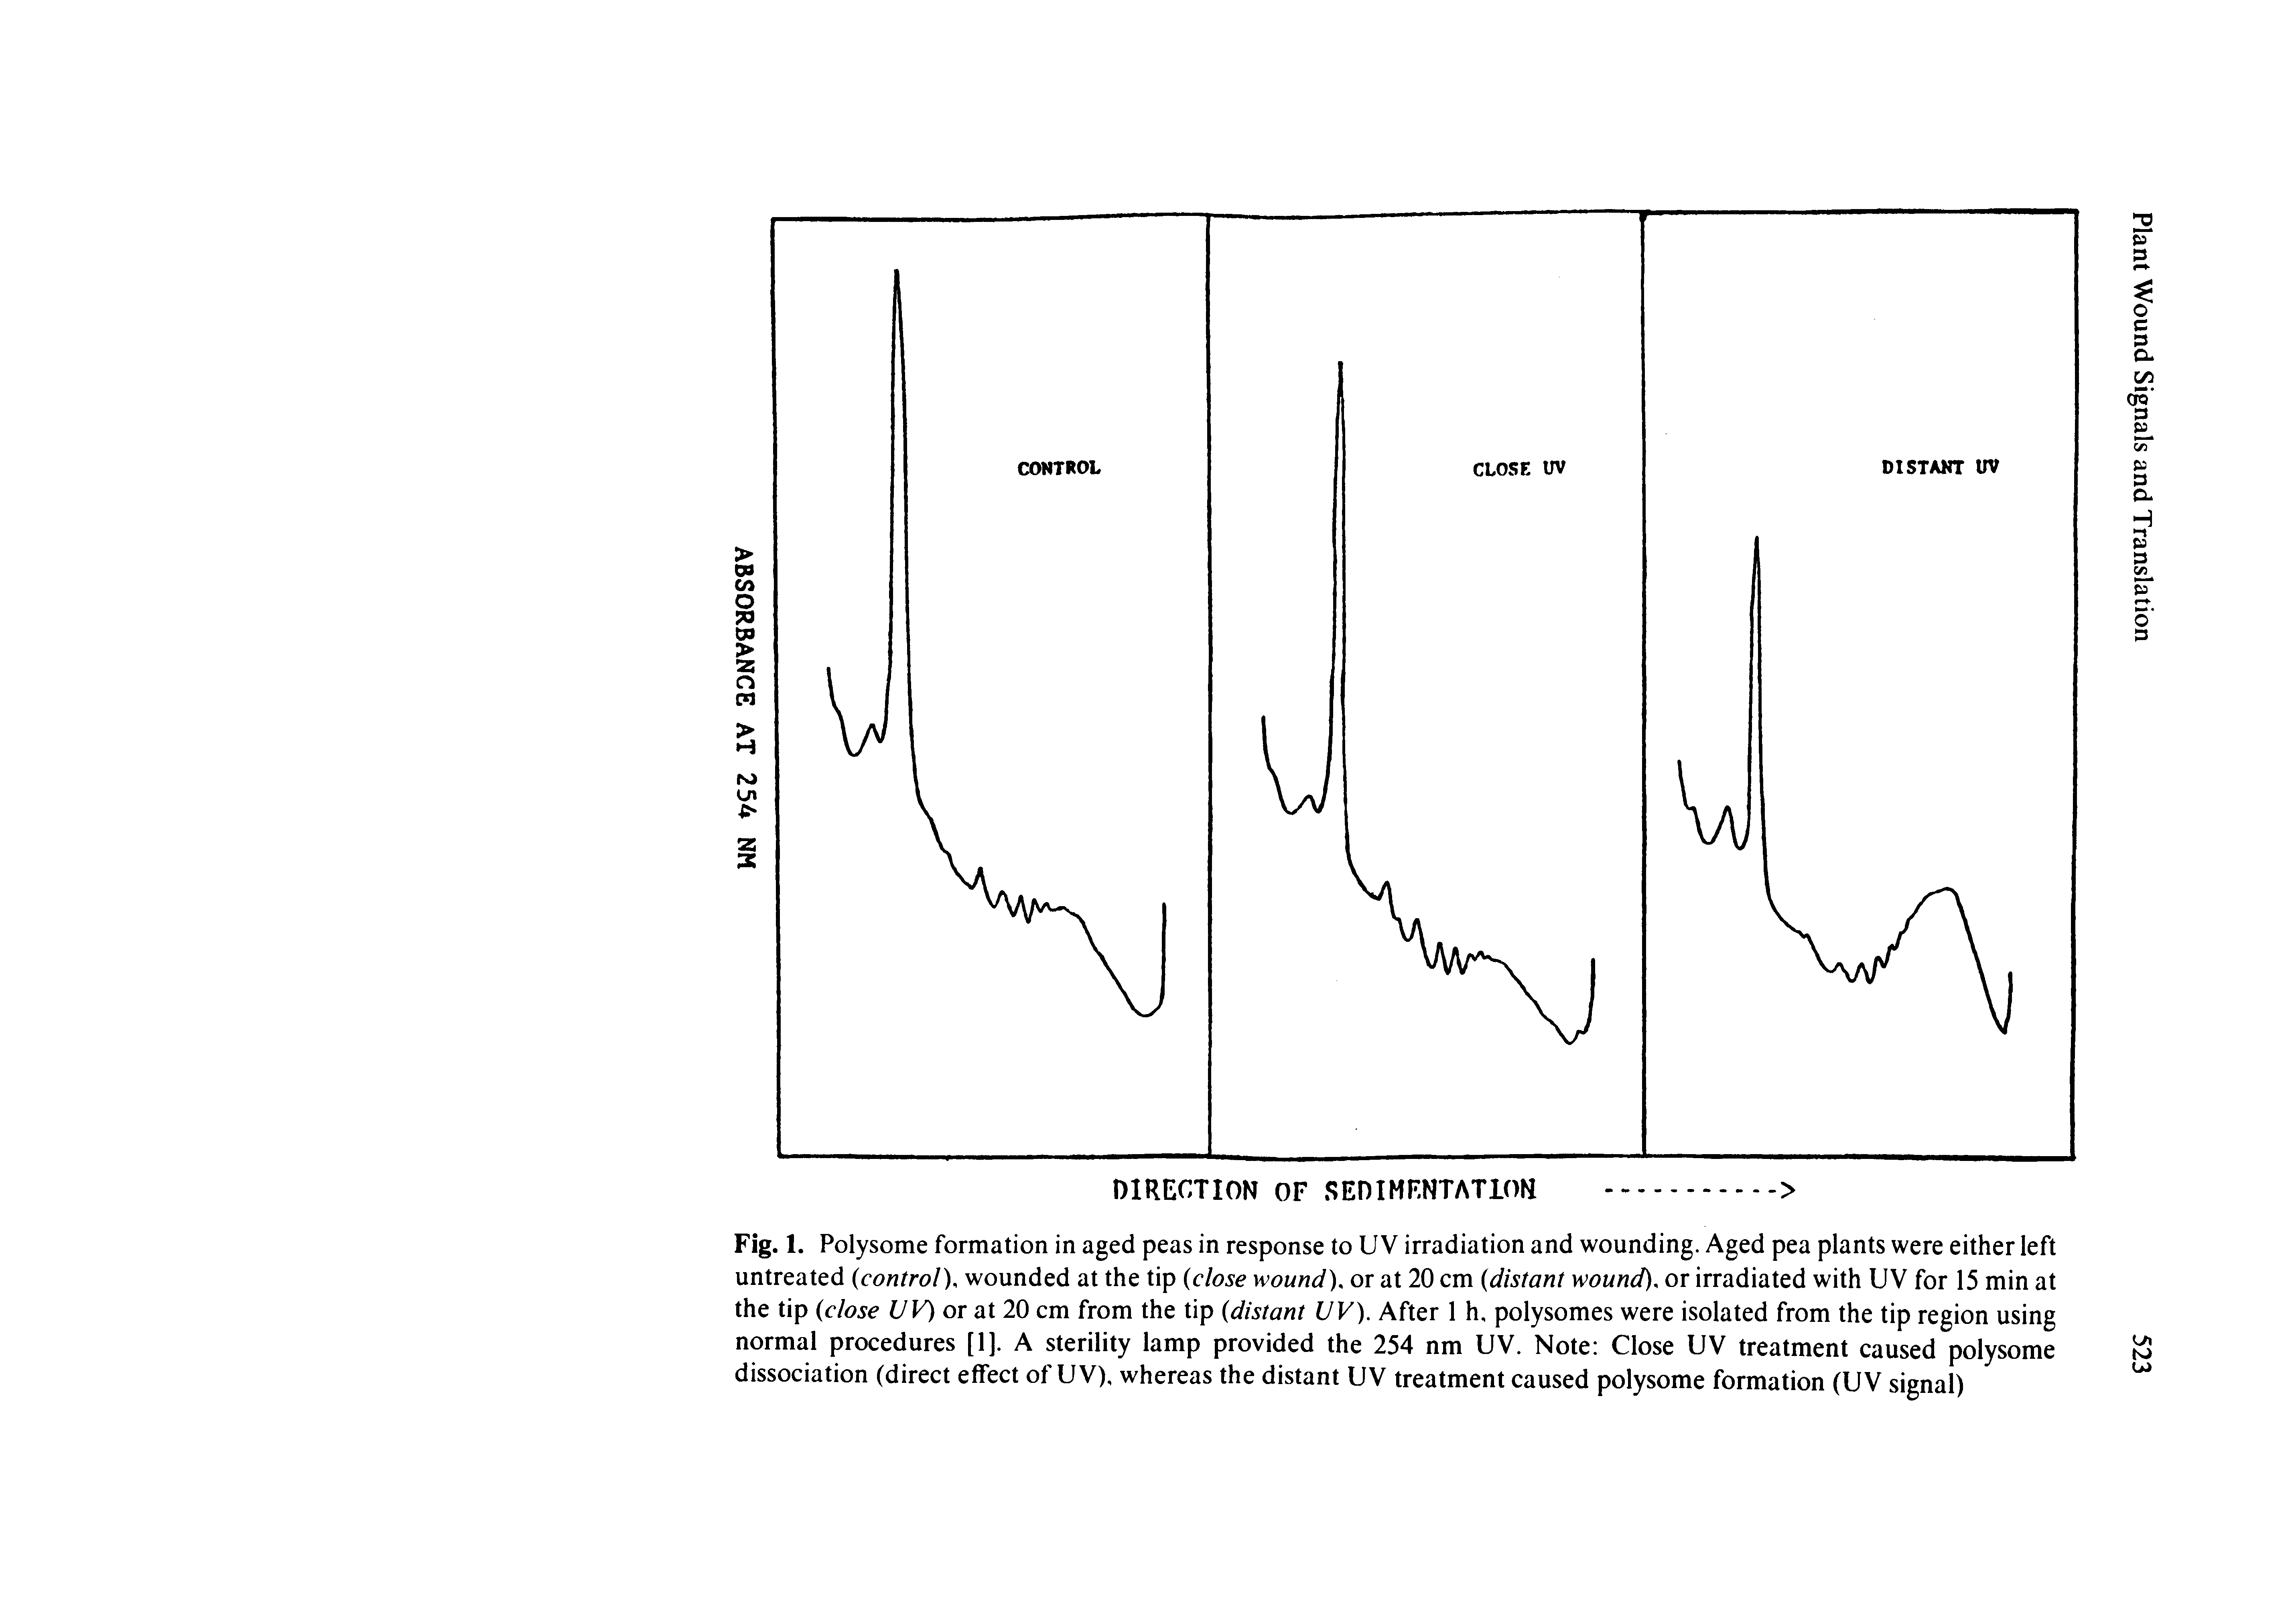 Fig. 1. Polysome formation in aged peas in response to U V irradiation and wounding. Aged pea plants were either left untreated control), wounded at the tip close wound), or at 20 cm distant wound), or irradiated with UV for 15 min at the tip close VV)or <ii 20 cm from the tip distant VV). After 1 h, polysomes were isolated from the tip region using normal procedures [1]. A sterility lamp provided the 254 nm UV. Note Close UV treatment caused polysome dissociation (direct effect of UV), whereas the distant UV treatment caused polysome formation (UV signal)...